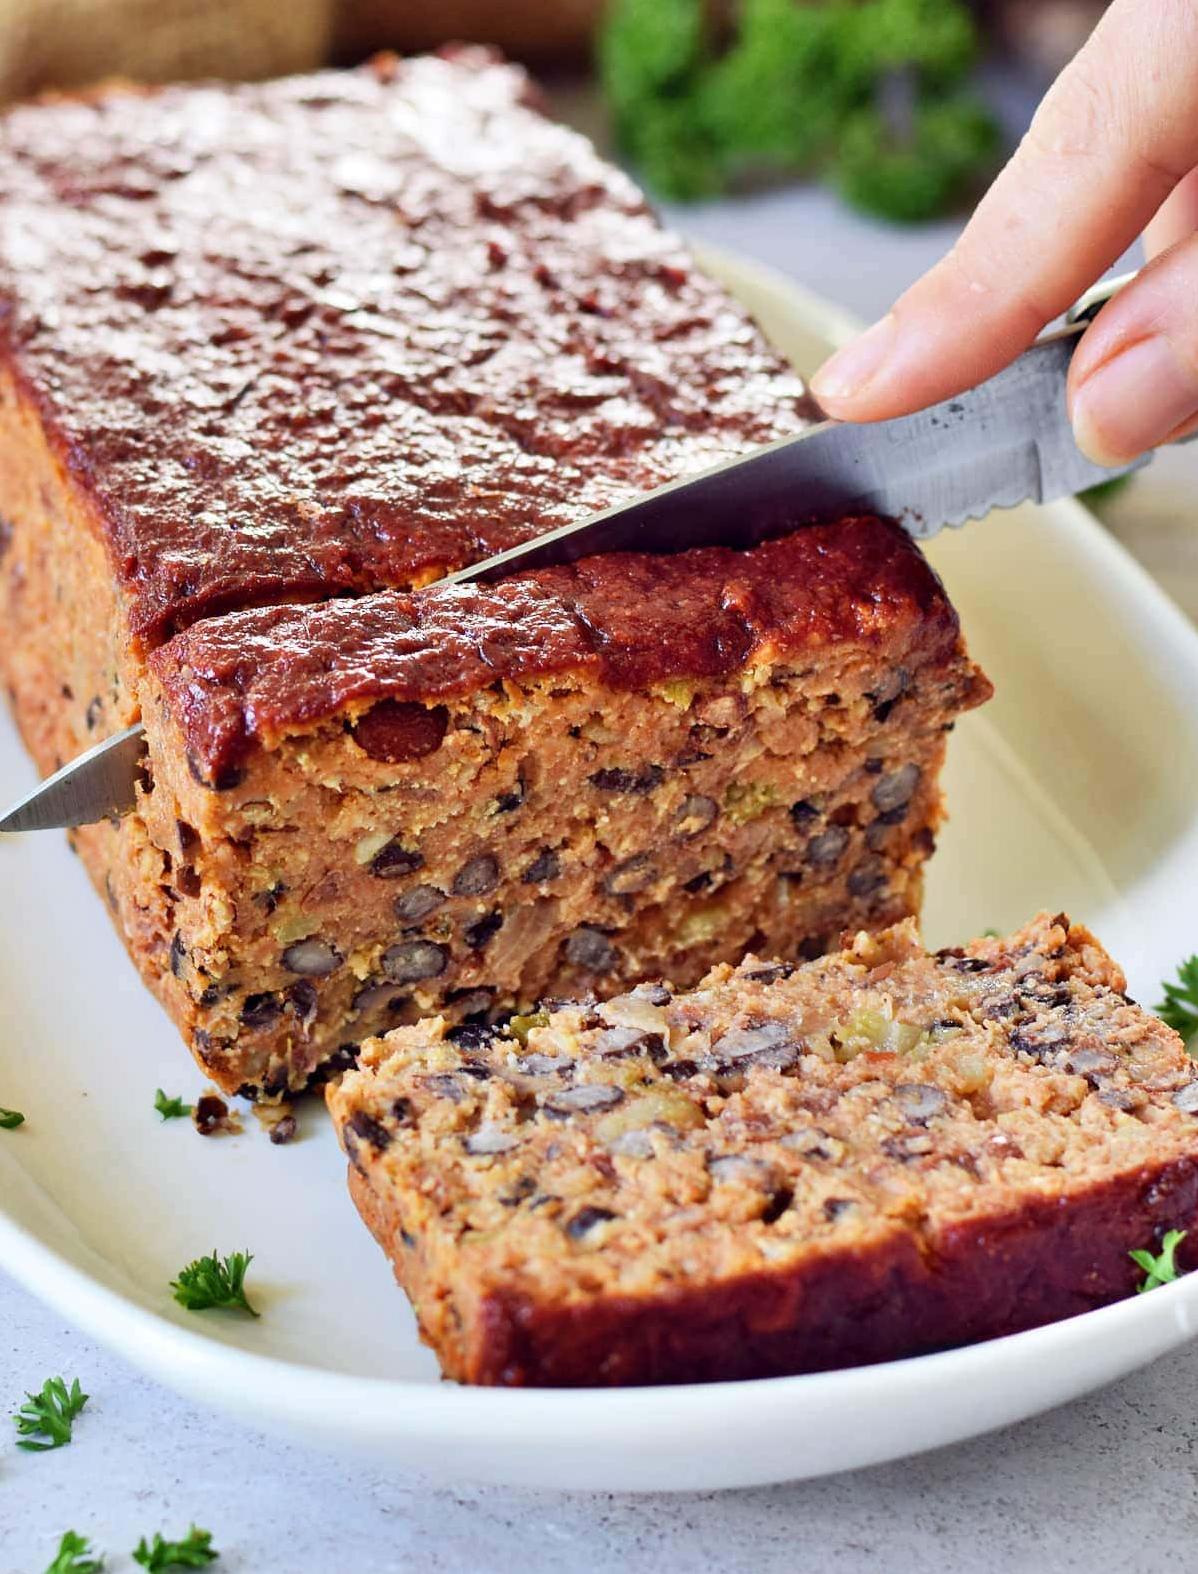  Our meatloaf is made with no actual meat, but you won't be able to tell the difference!